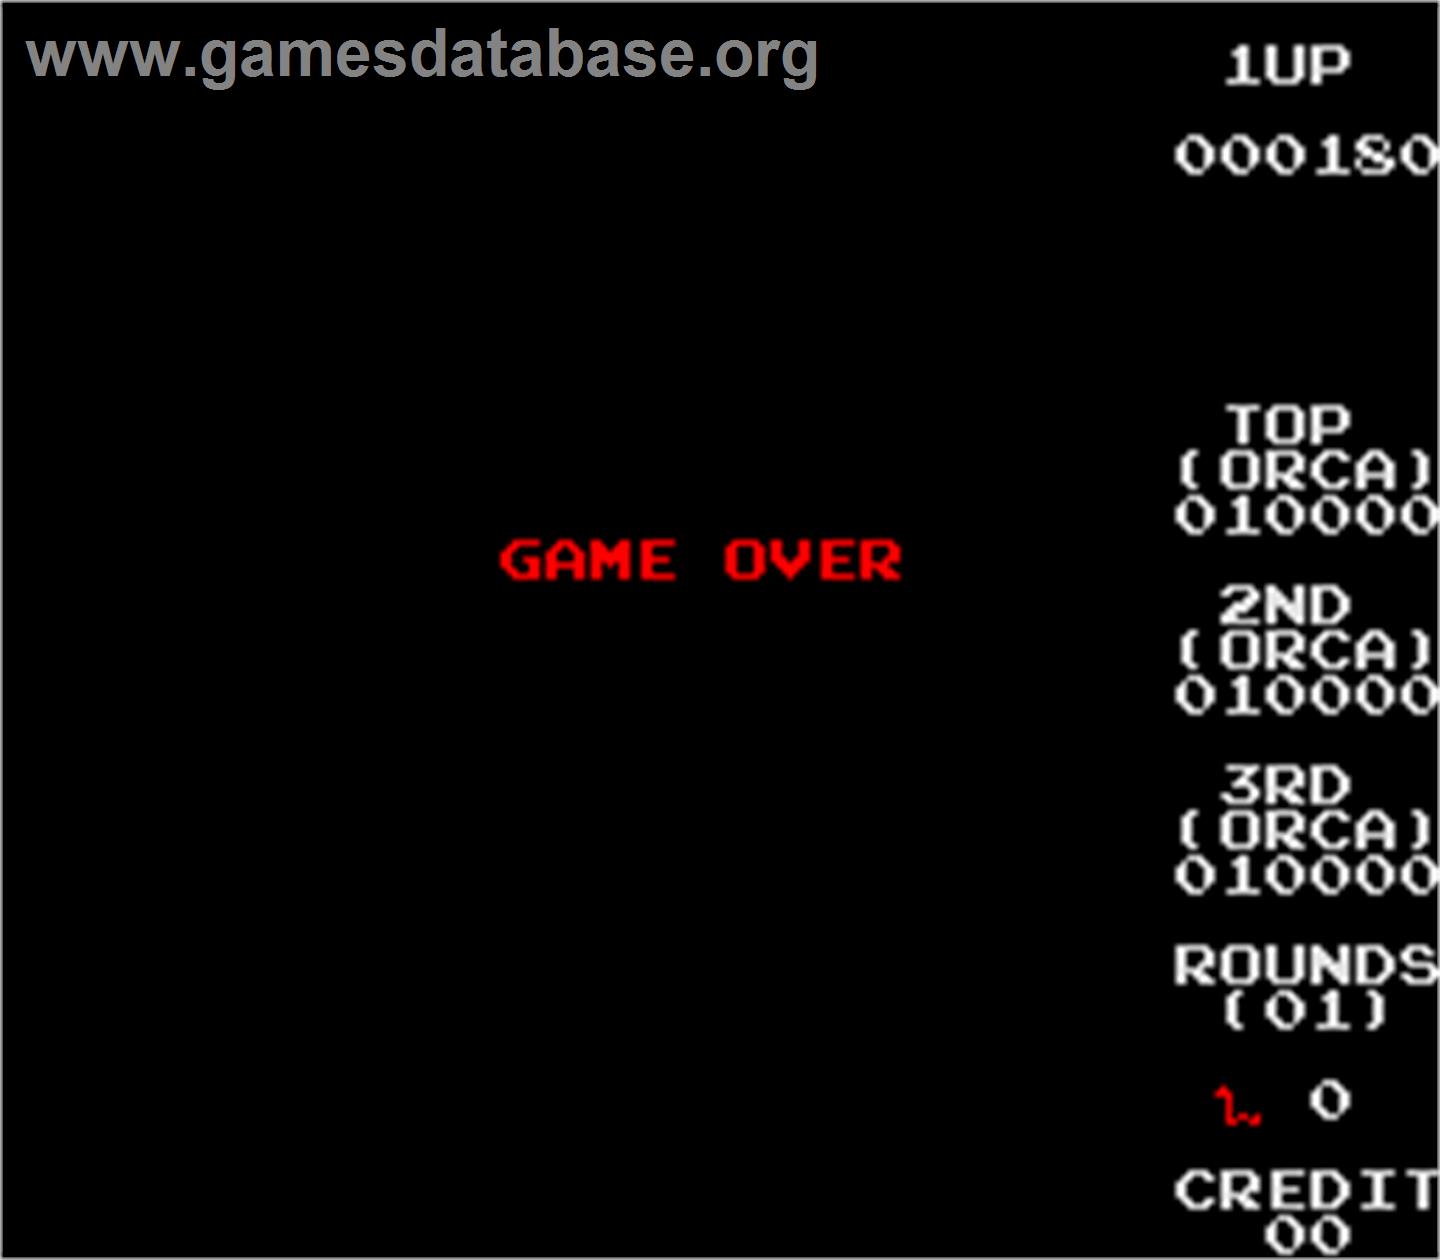 Changes - Arcade - Artwork - Game Over Screen